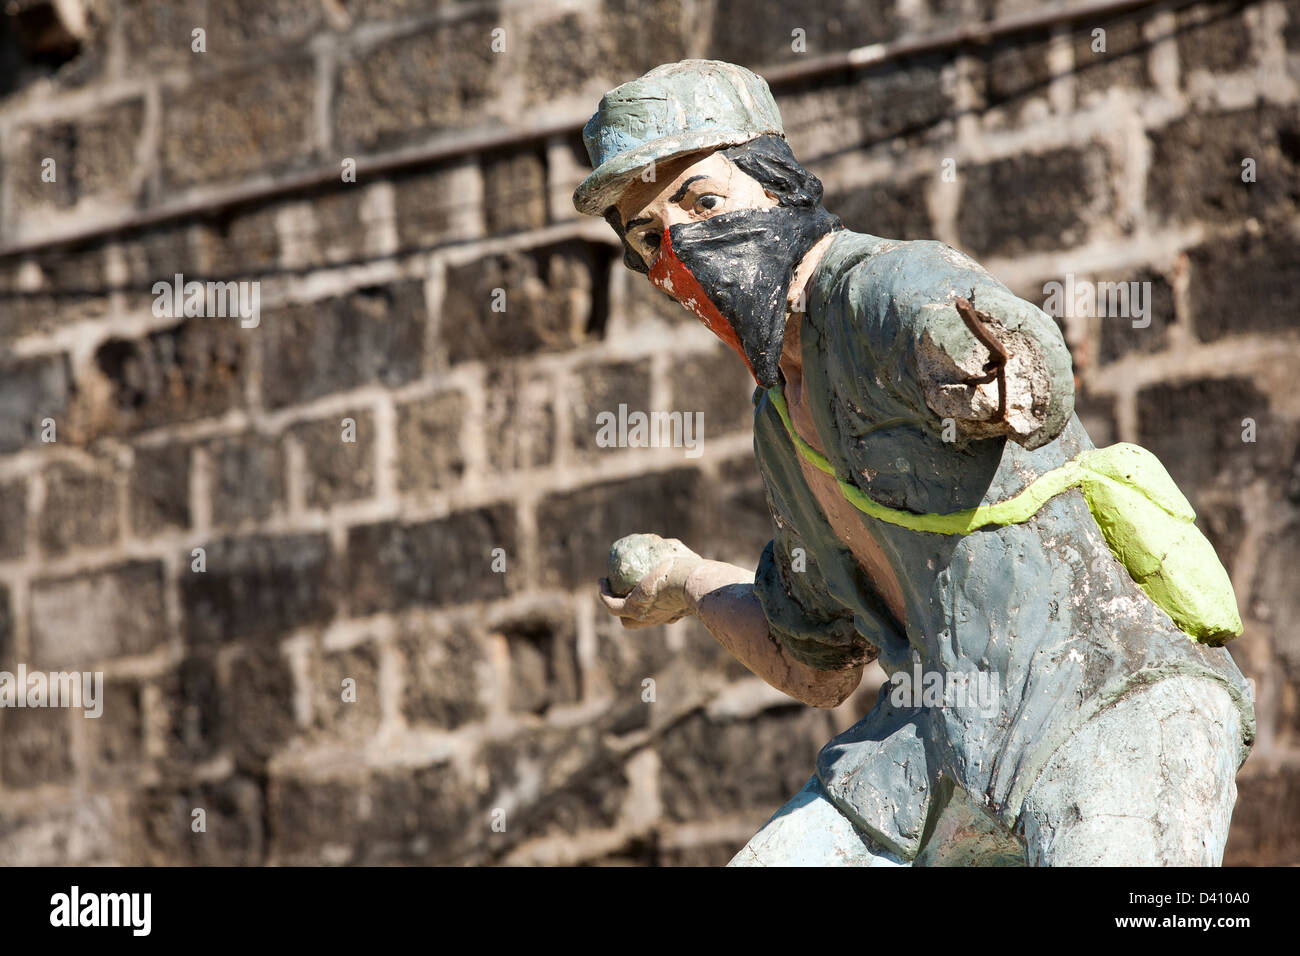 A statue of a masked sandinista fighter throwing something in protest in Leon Nicaragua Stock Photo